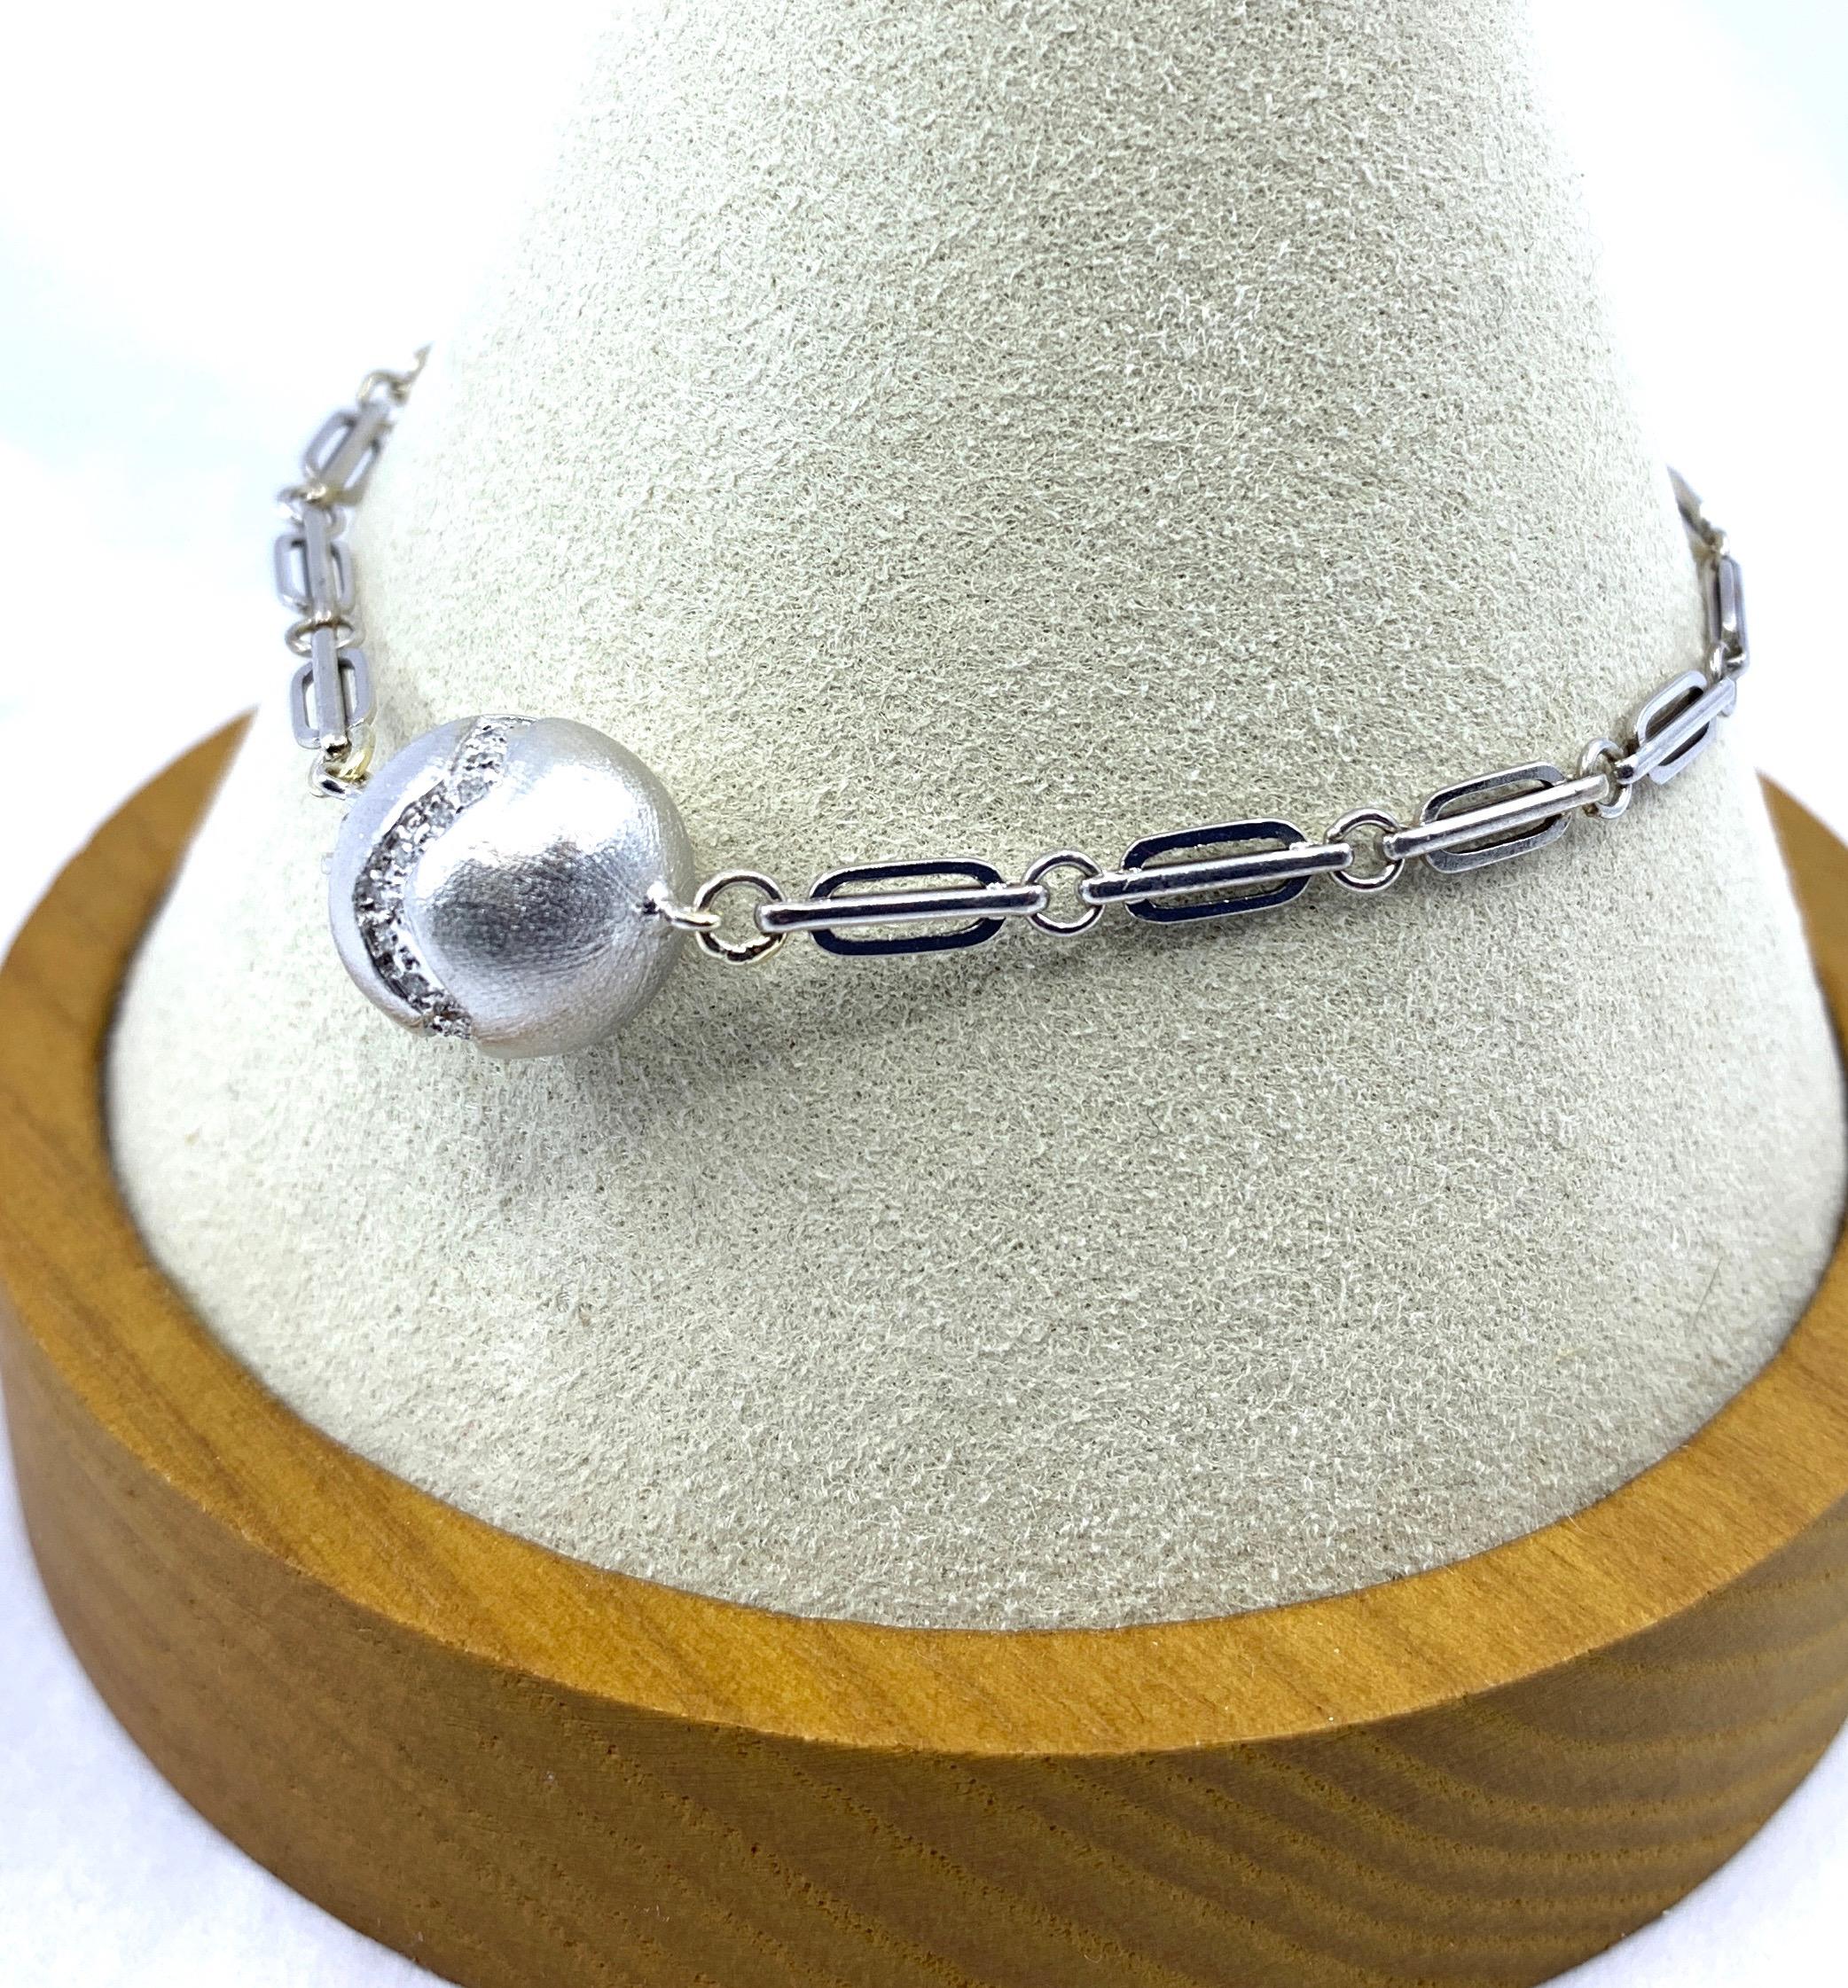 Contemporary White Gold Bracelet with Deco-Era Watch Chain Links and Diamond Ball Clasp